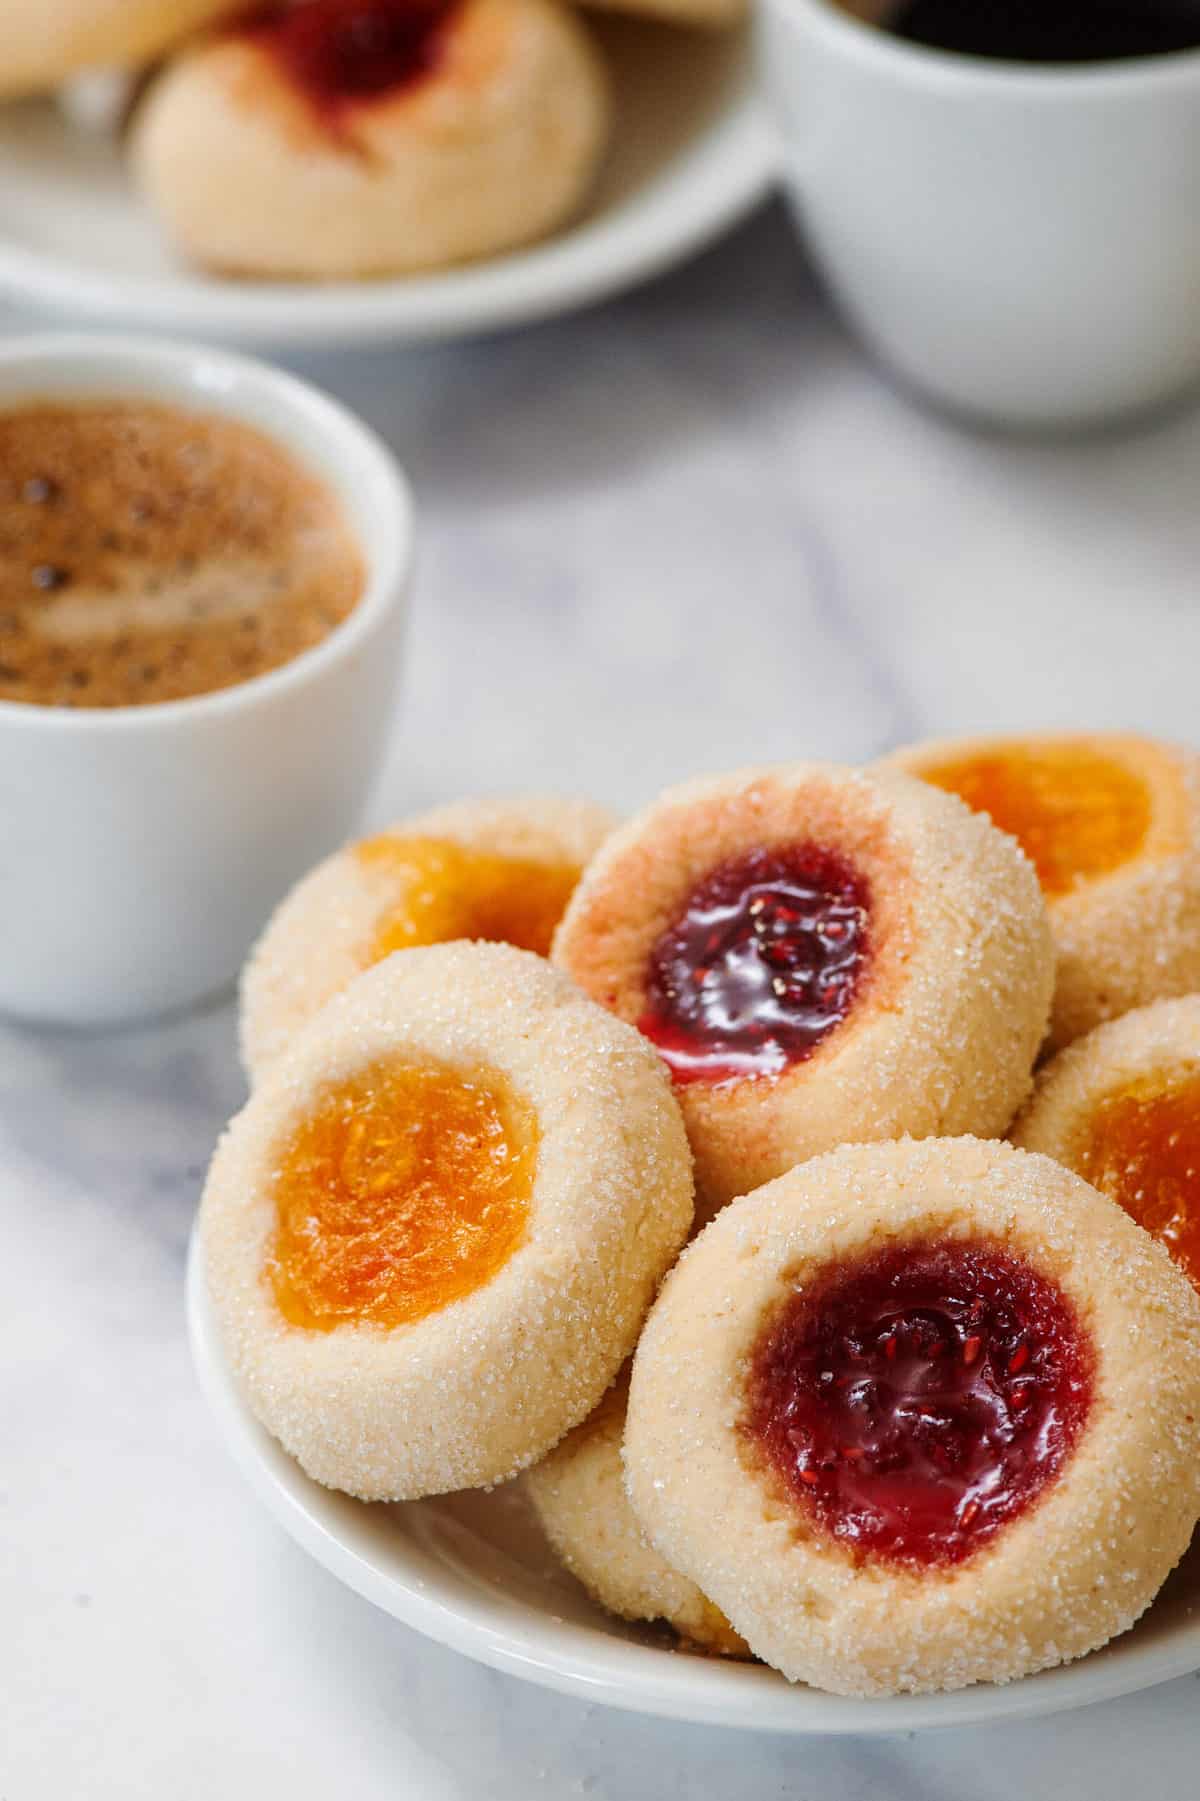 thumbprint cookies served in a white bowl.